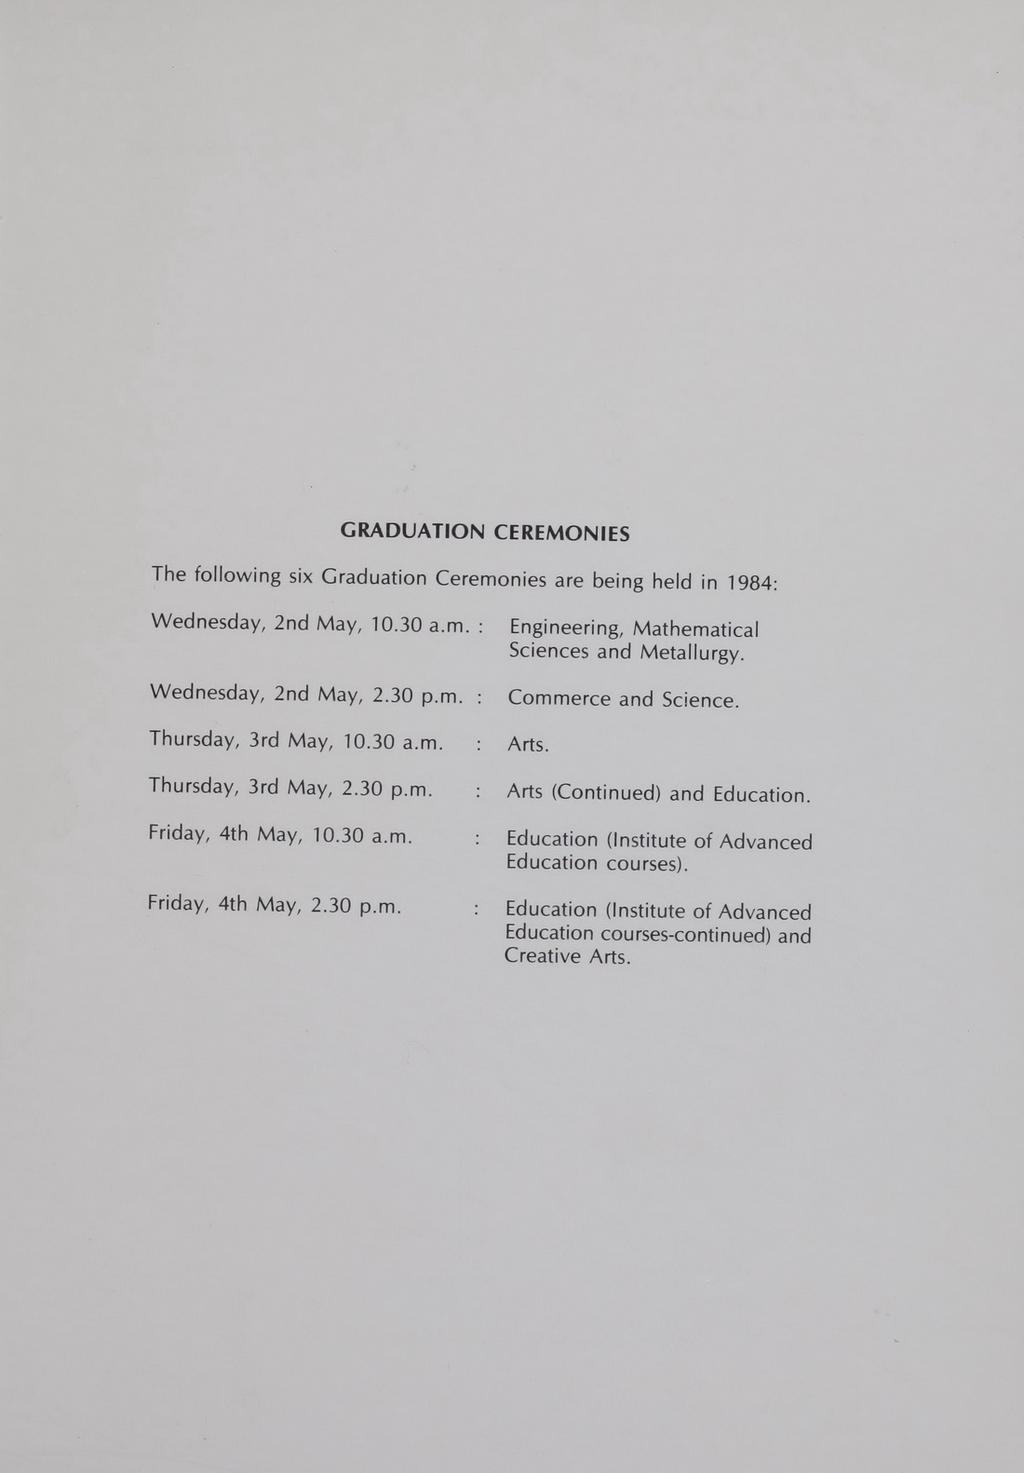 GRADUATION CEREMONIES The following six Graduation Ceremonies are being held in 1984: Wednesday, 2nd May, 10.30 a.m.: Wednesday, 2nd May, 2.30 p.m. Engineering, Mathematical Sciences and Metallurgy.